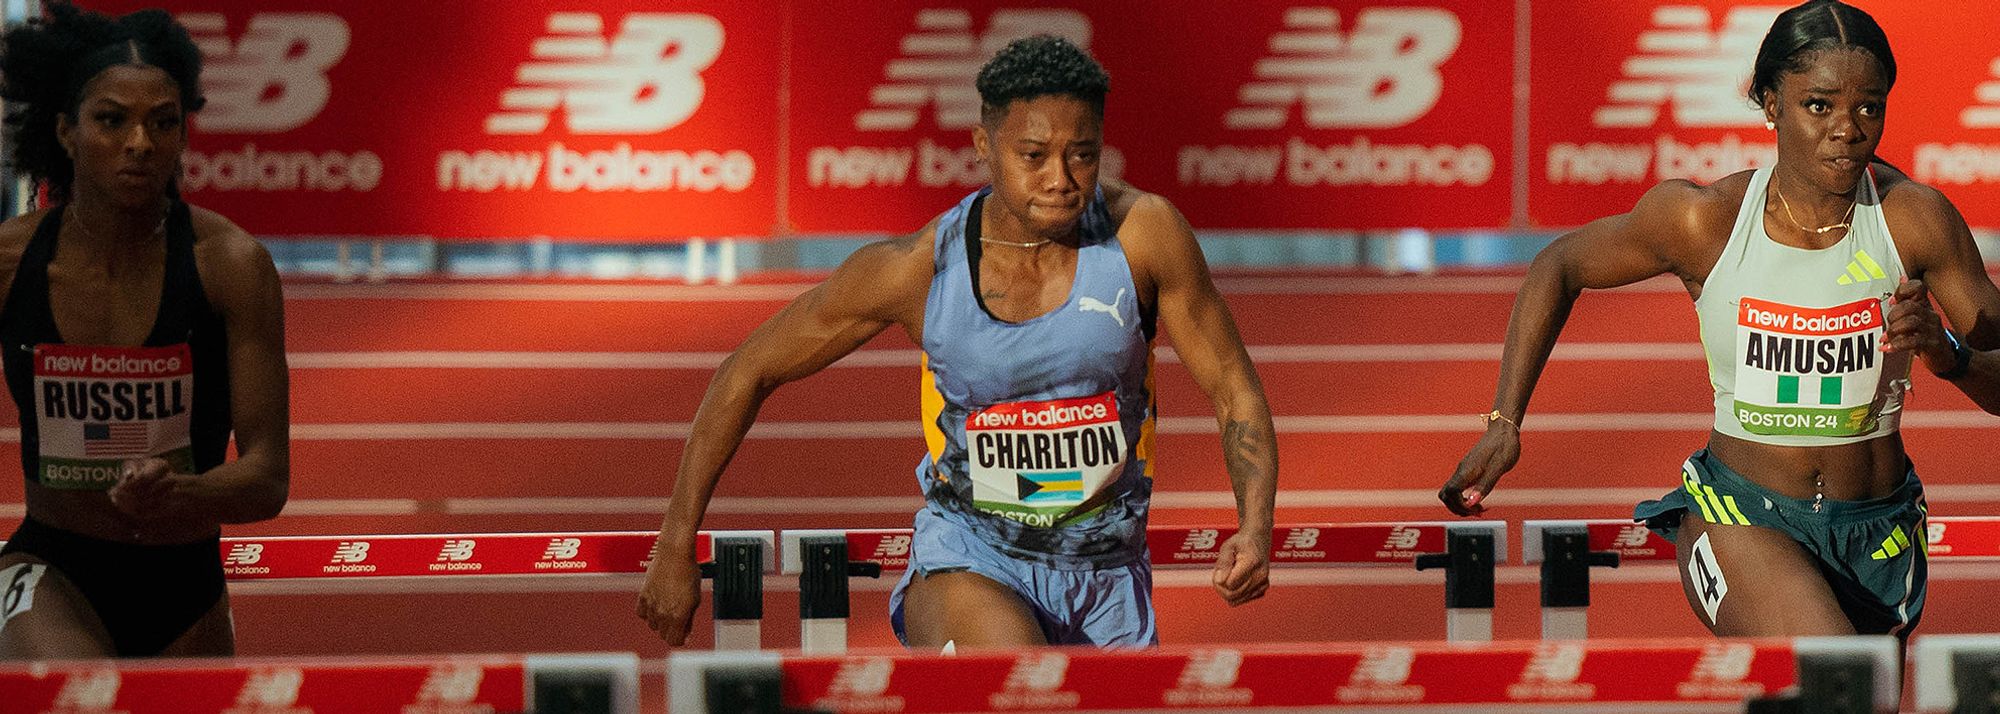 Just two weeks after breaking the world 60m hurdles record, Devynne Charlton heads to the World Athletics Indoor Tour Gold Final in Madrid